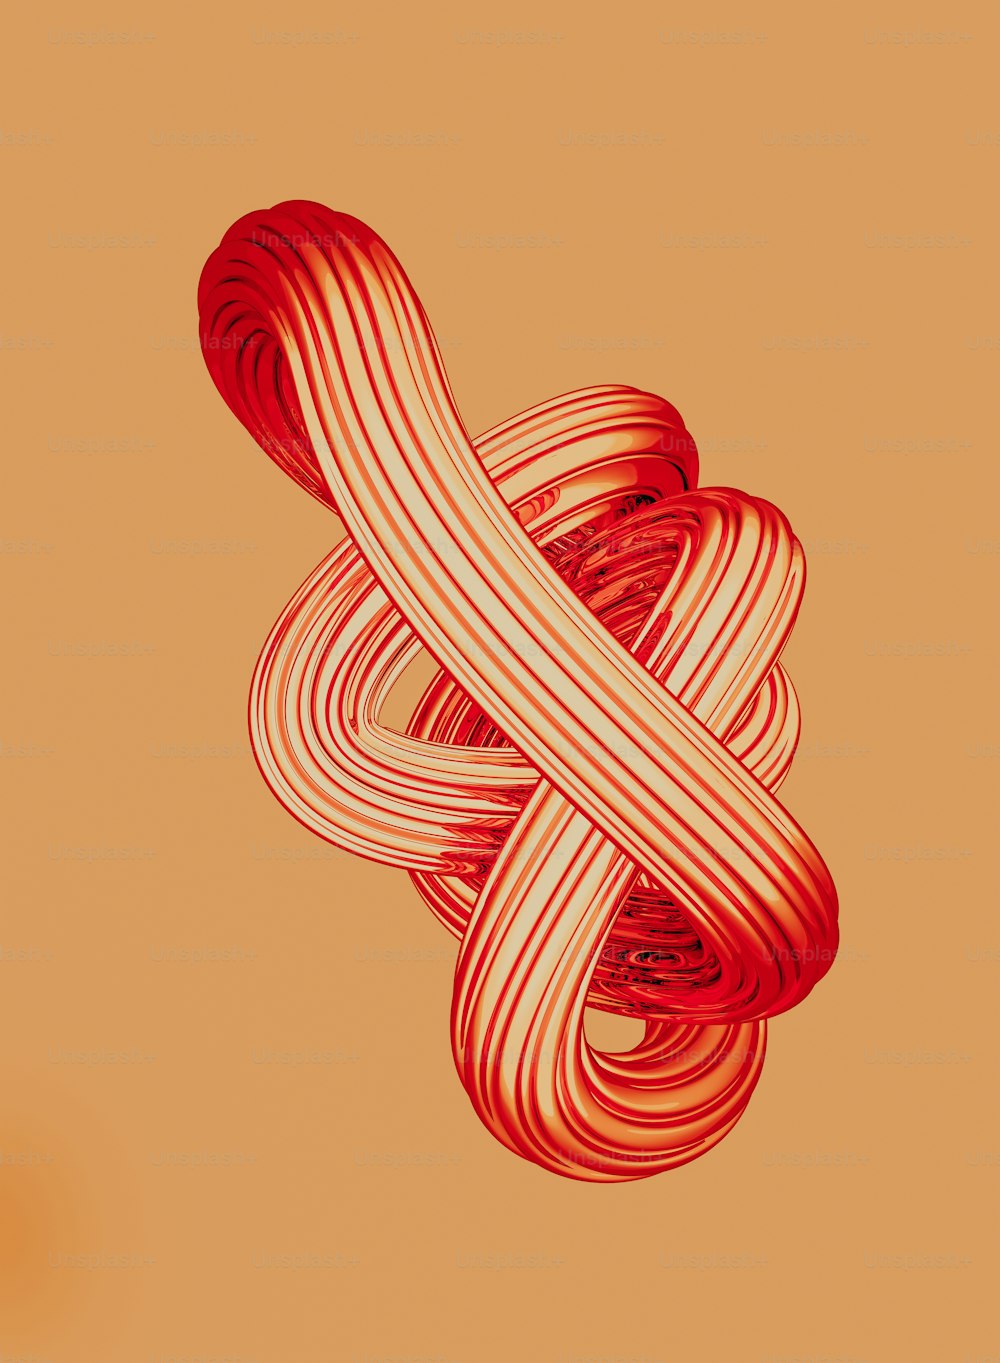 a red and white knot on an orange background